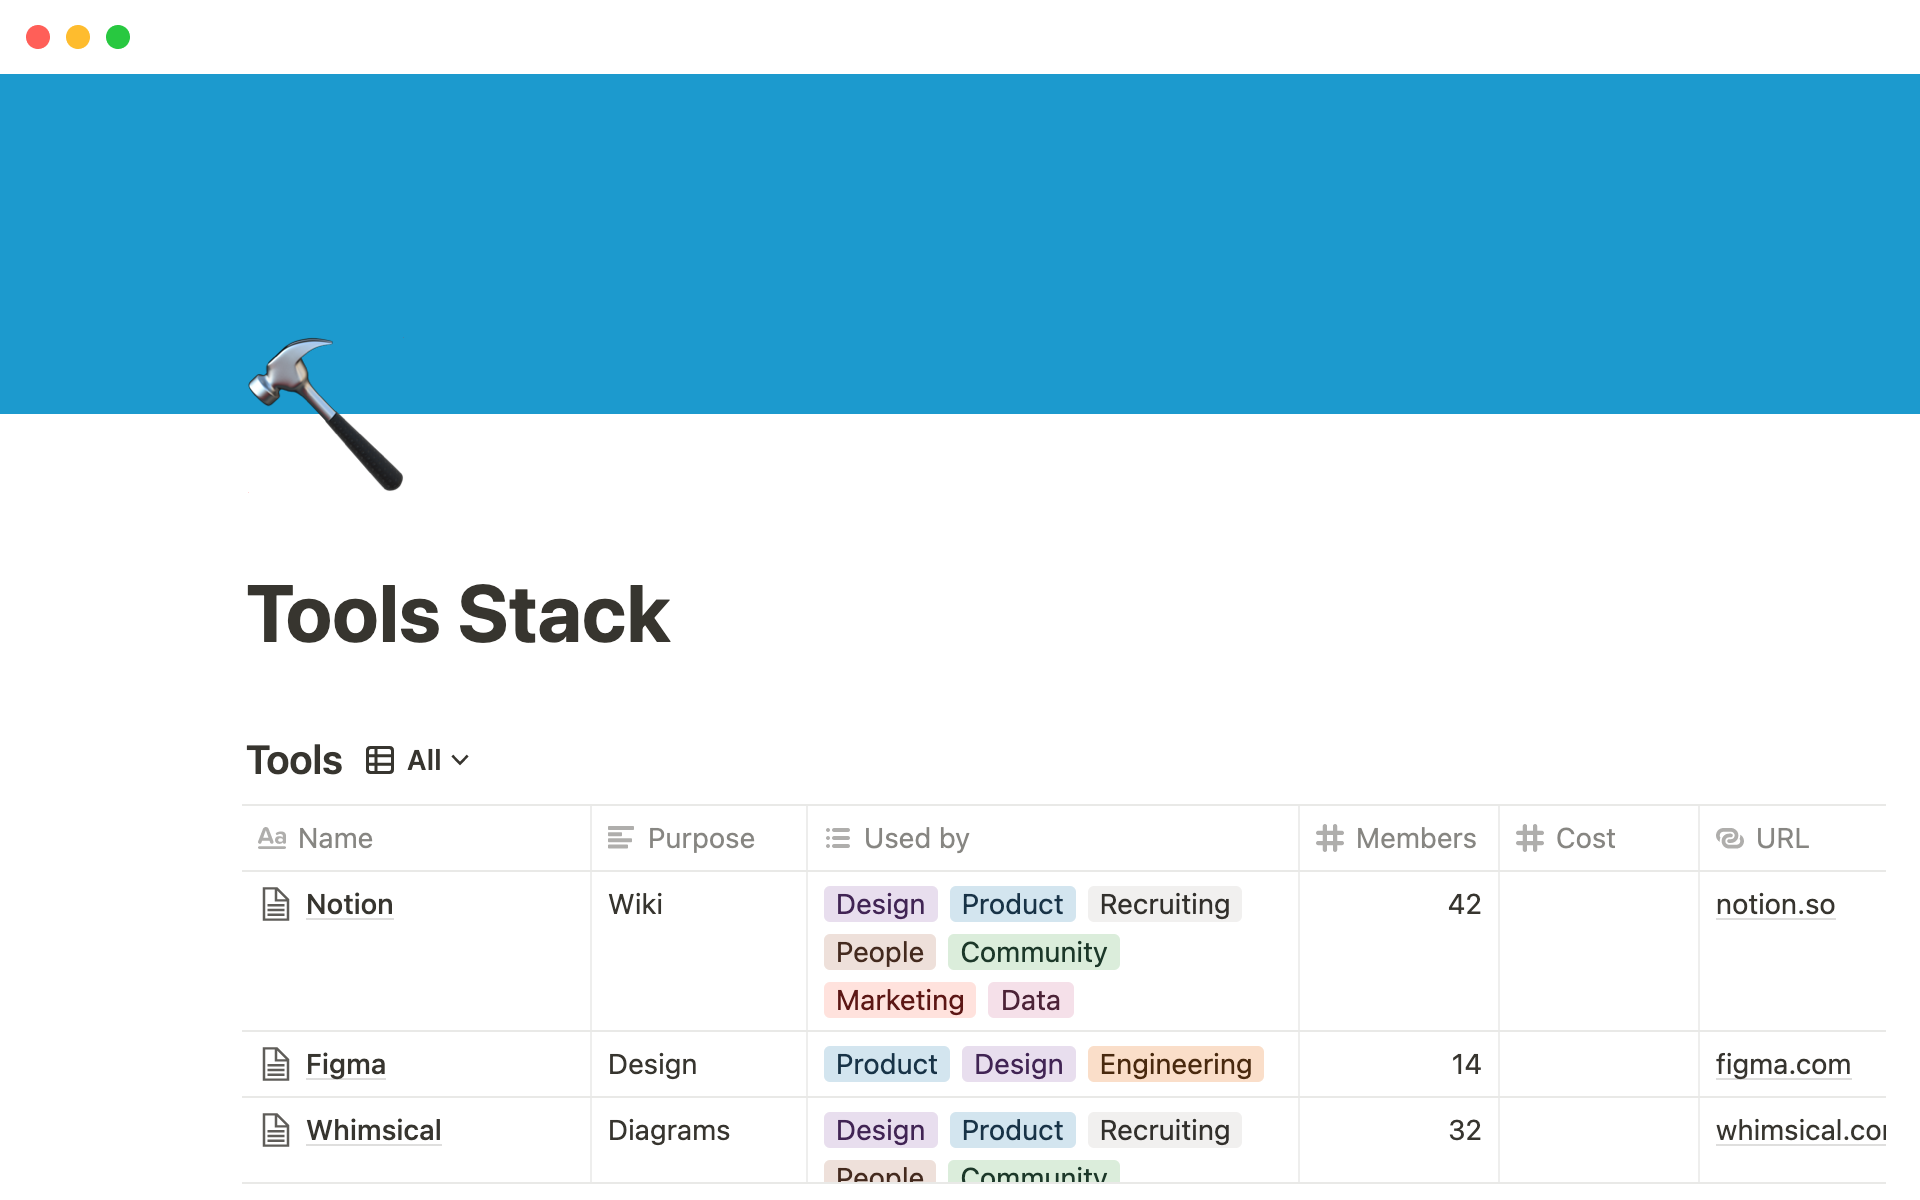 The desktop image for the Tools stack template